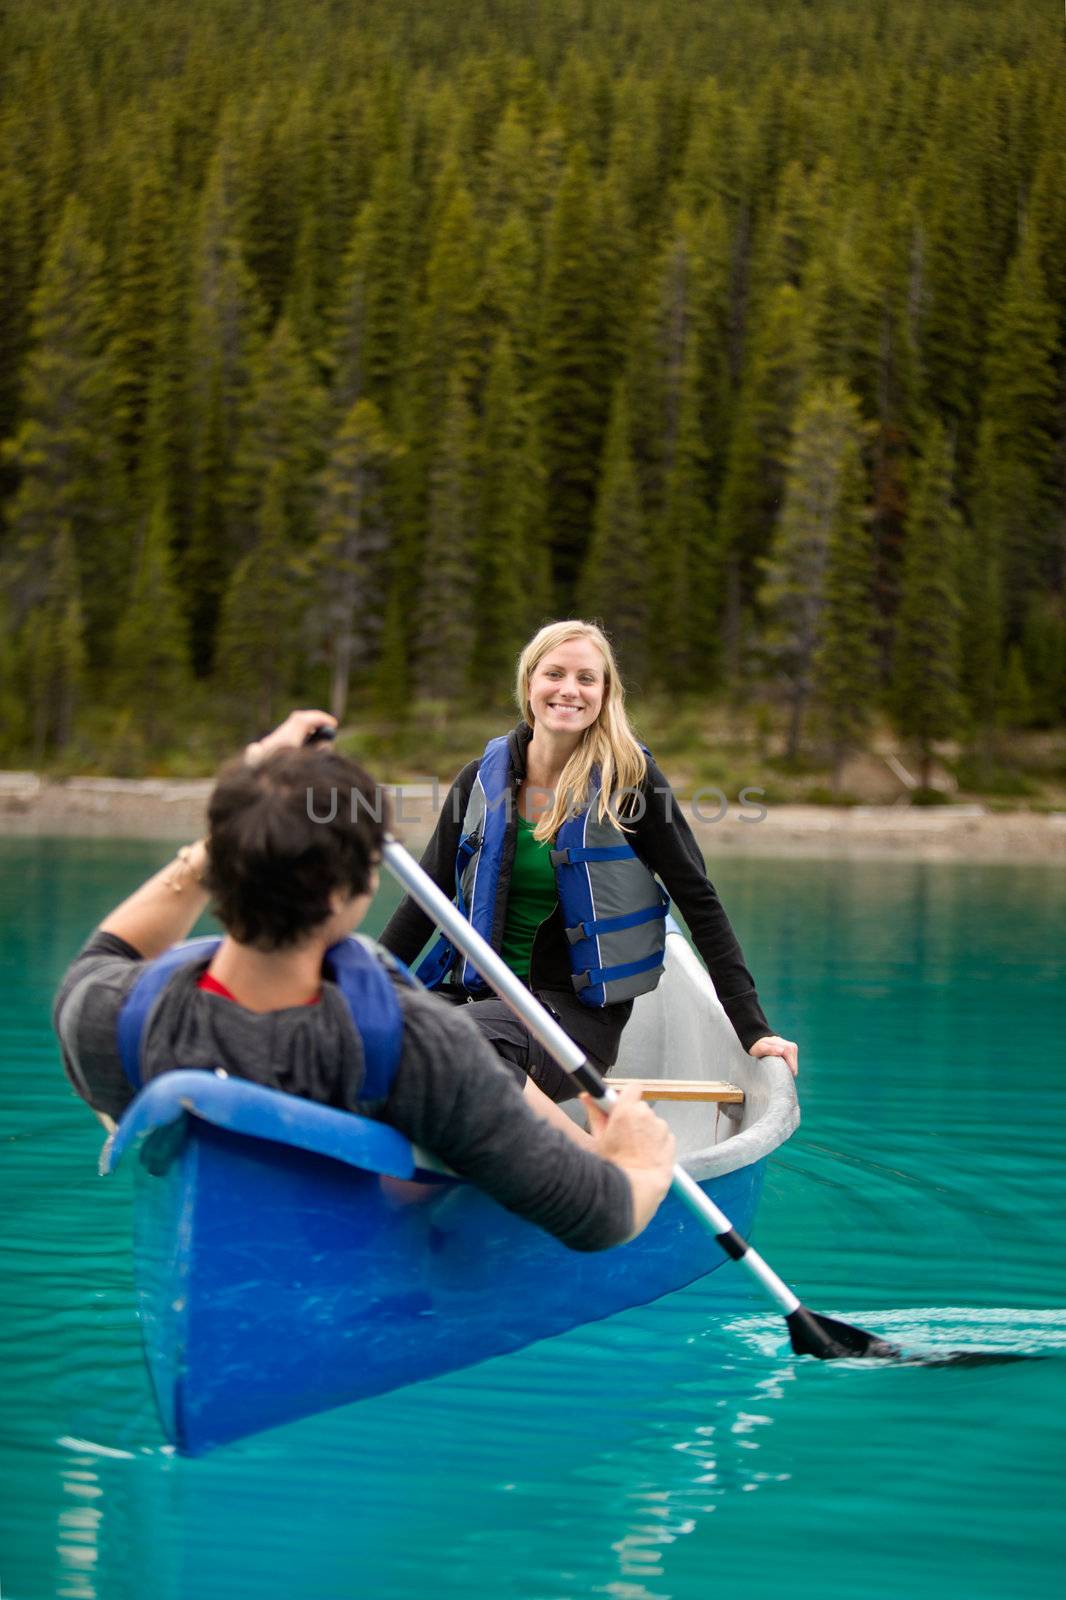 A happy couple canoeing on a glacial lake